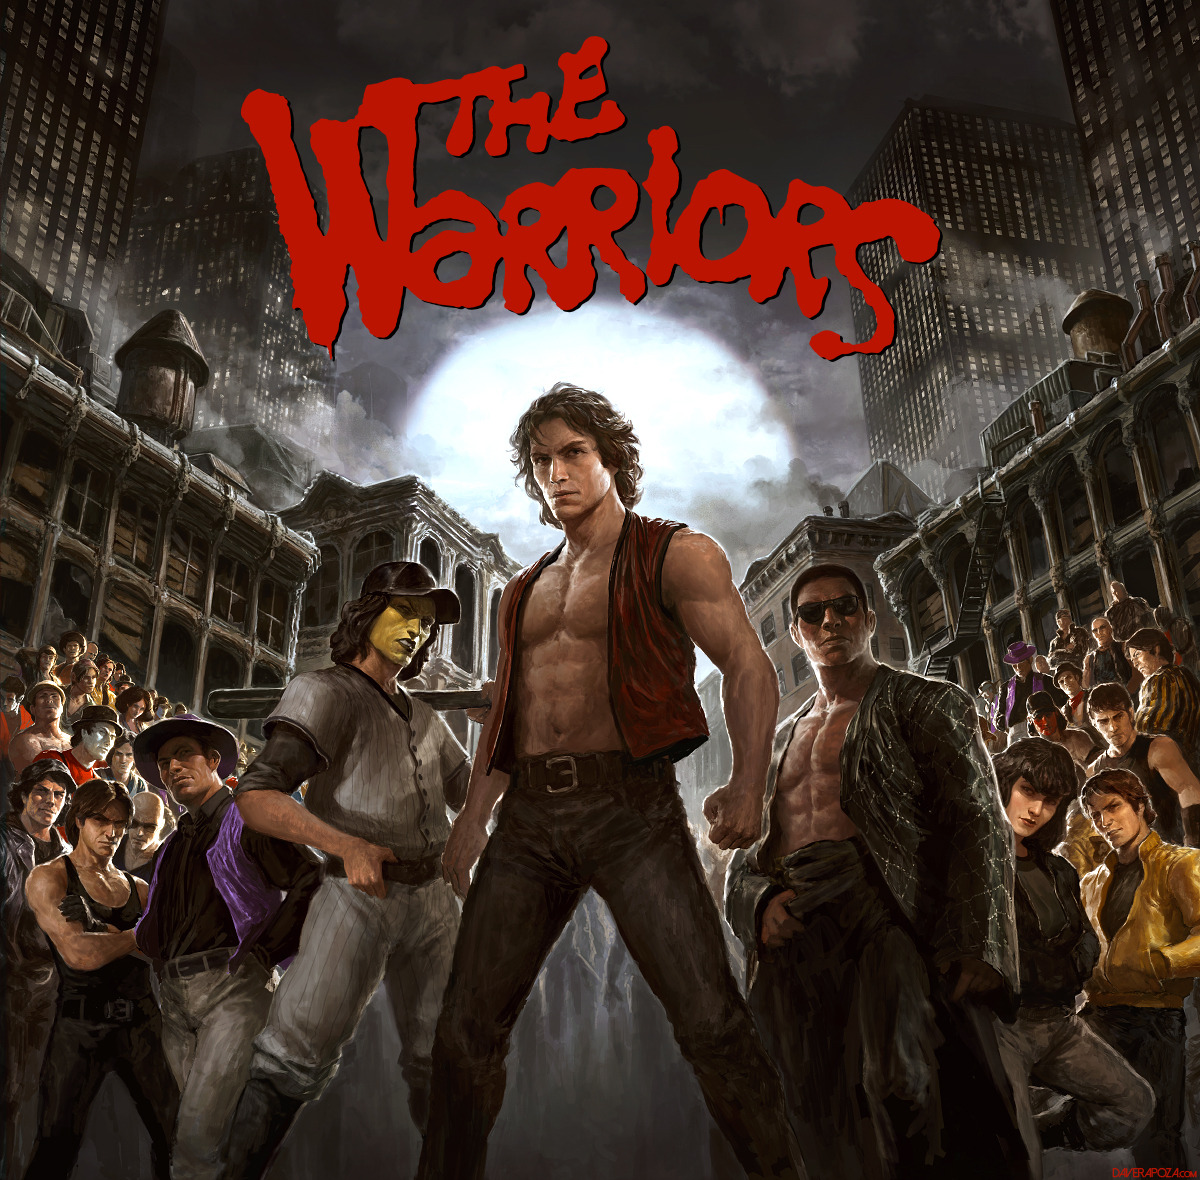 The Warriors - Double LP Record done for Waxwork Records! Available May 6th, 2016!
Early last year I was contacted by Waxwork to create album artwork for the upcoming release of their ‘The Warriors’ soundtrack! It was really great to be able to...